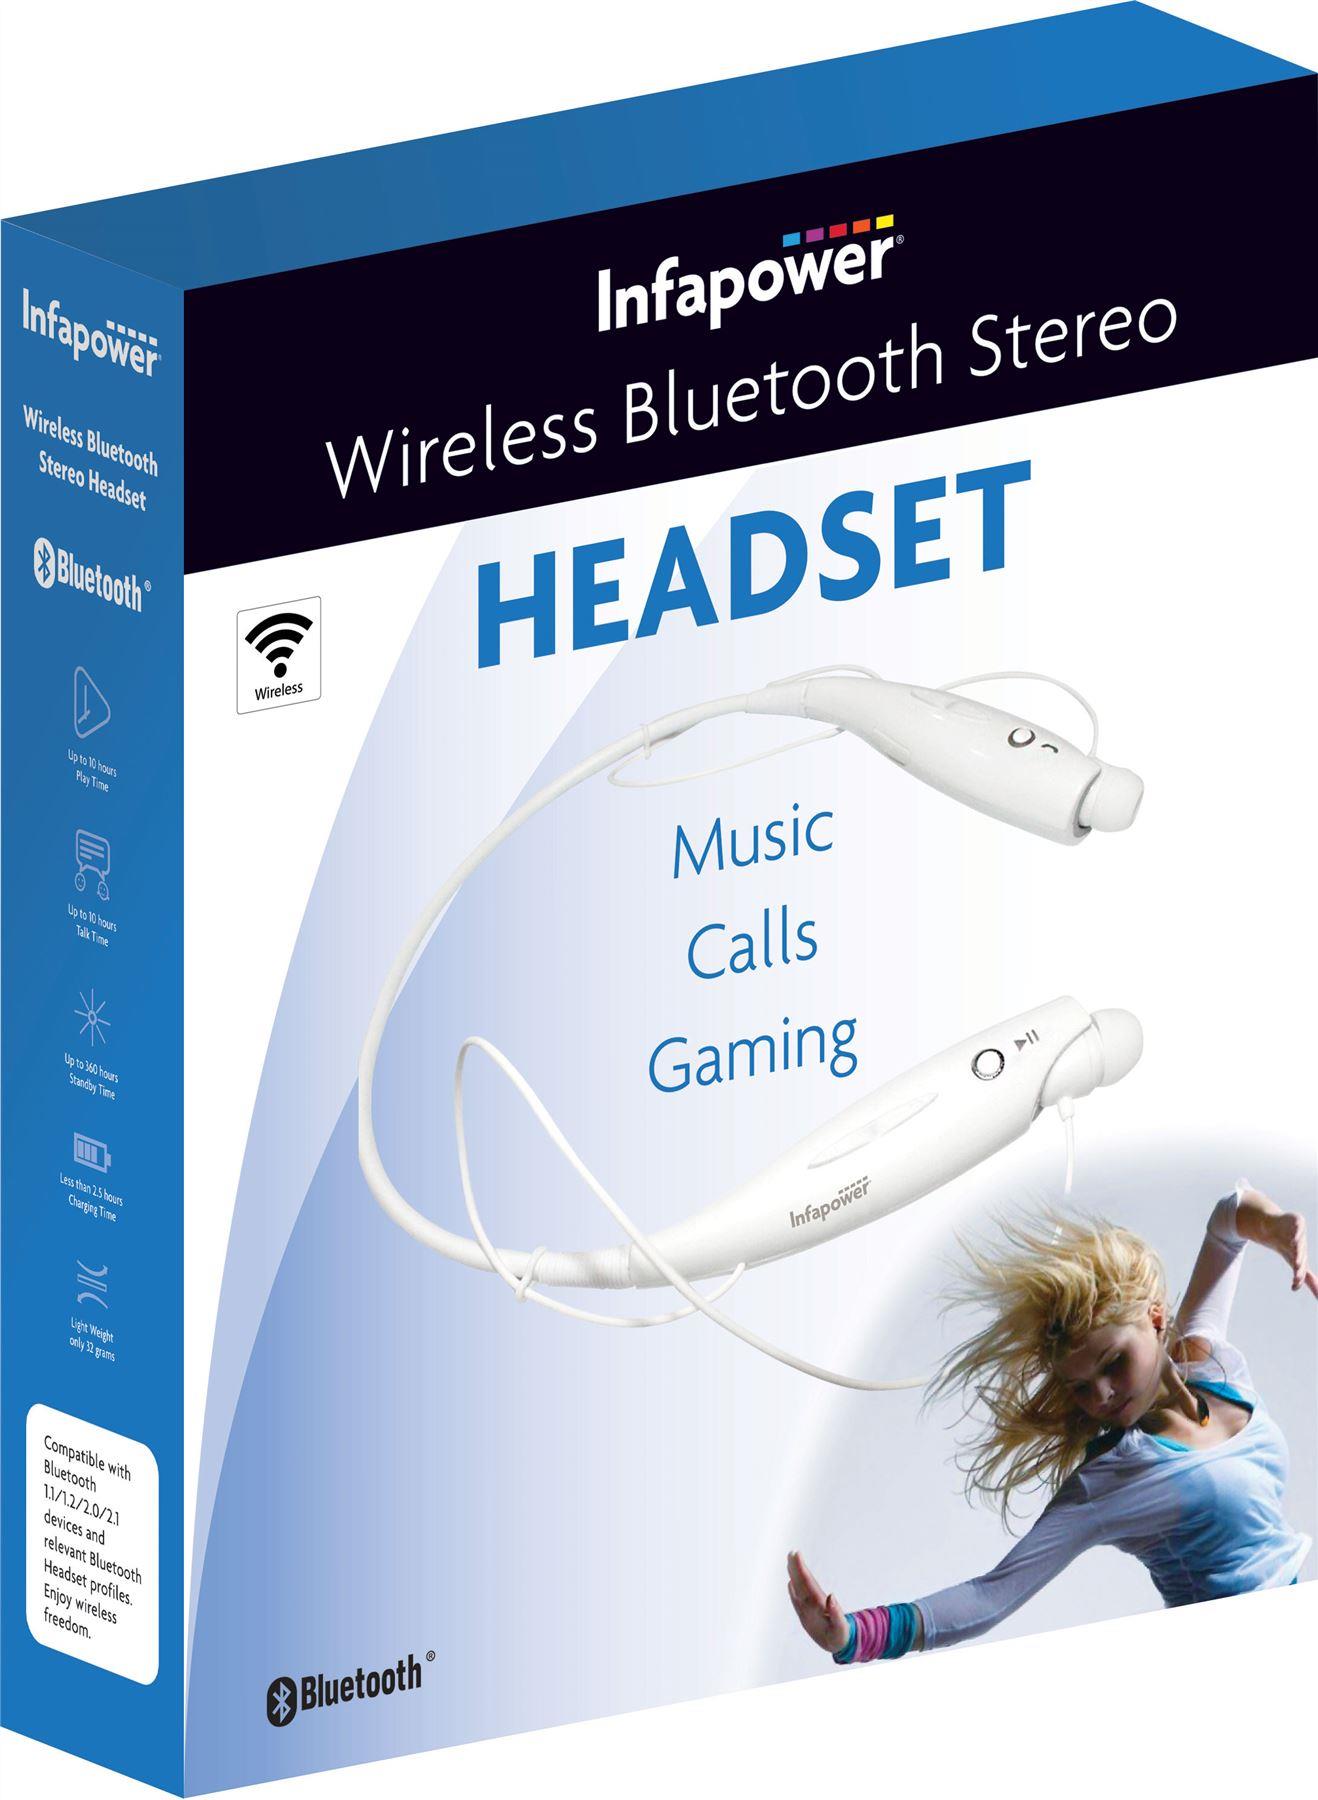 Infapower Bluetooth Stereo Headset (White) X304